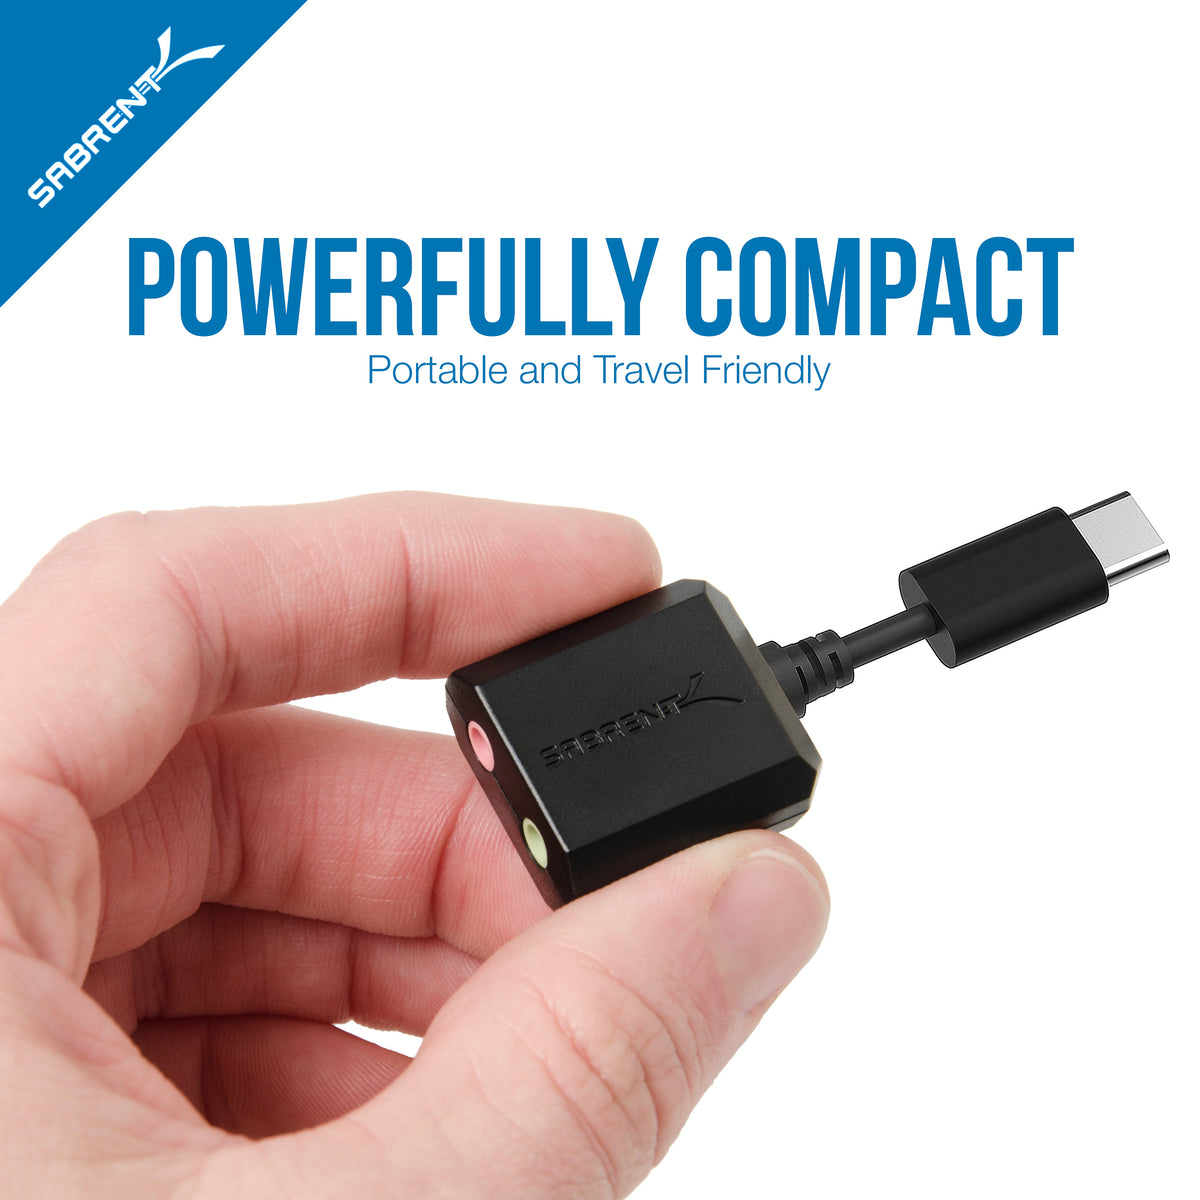 USB Type-C External Stereo Sound Adapter for Windows and Mac